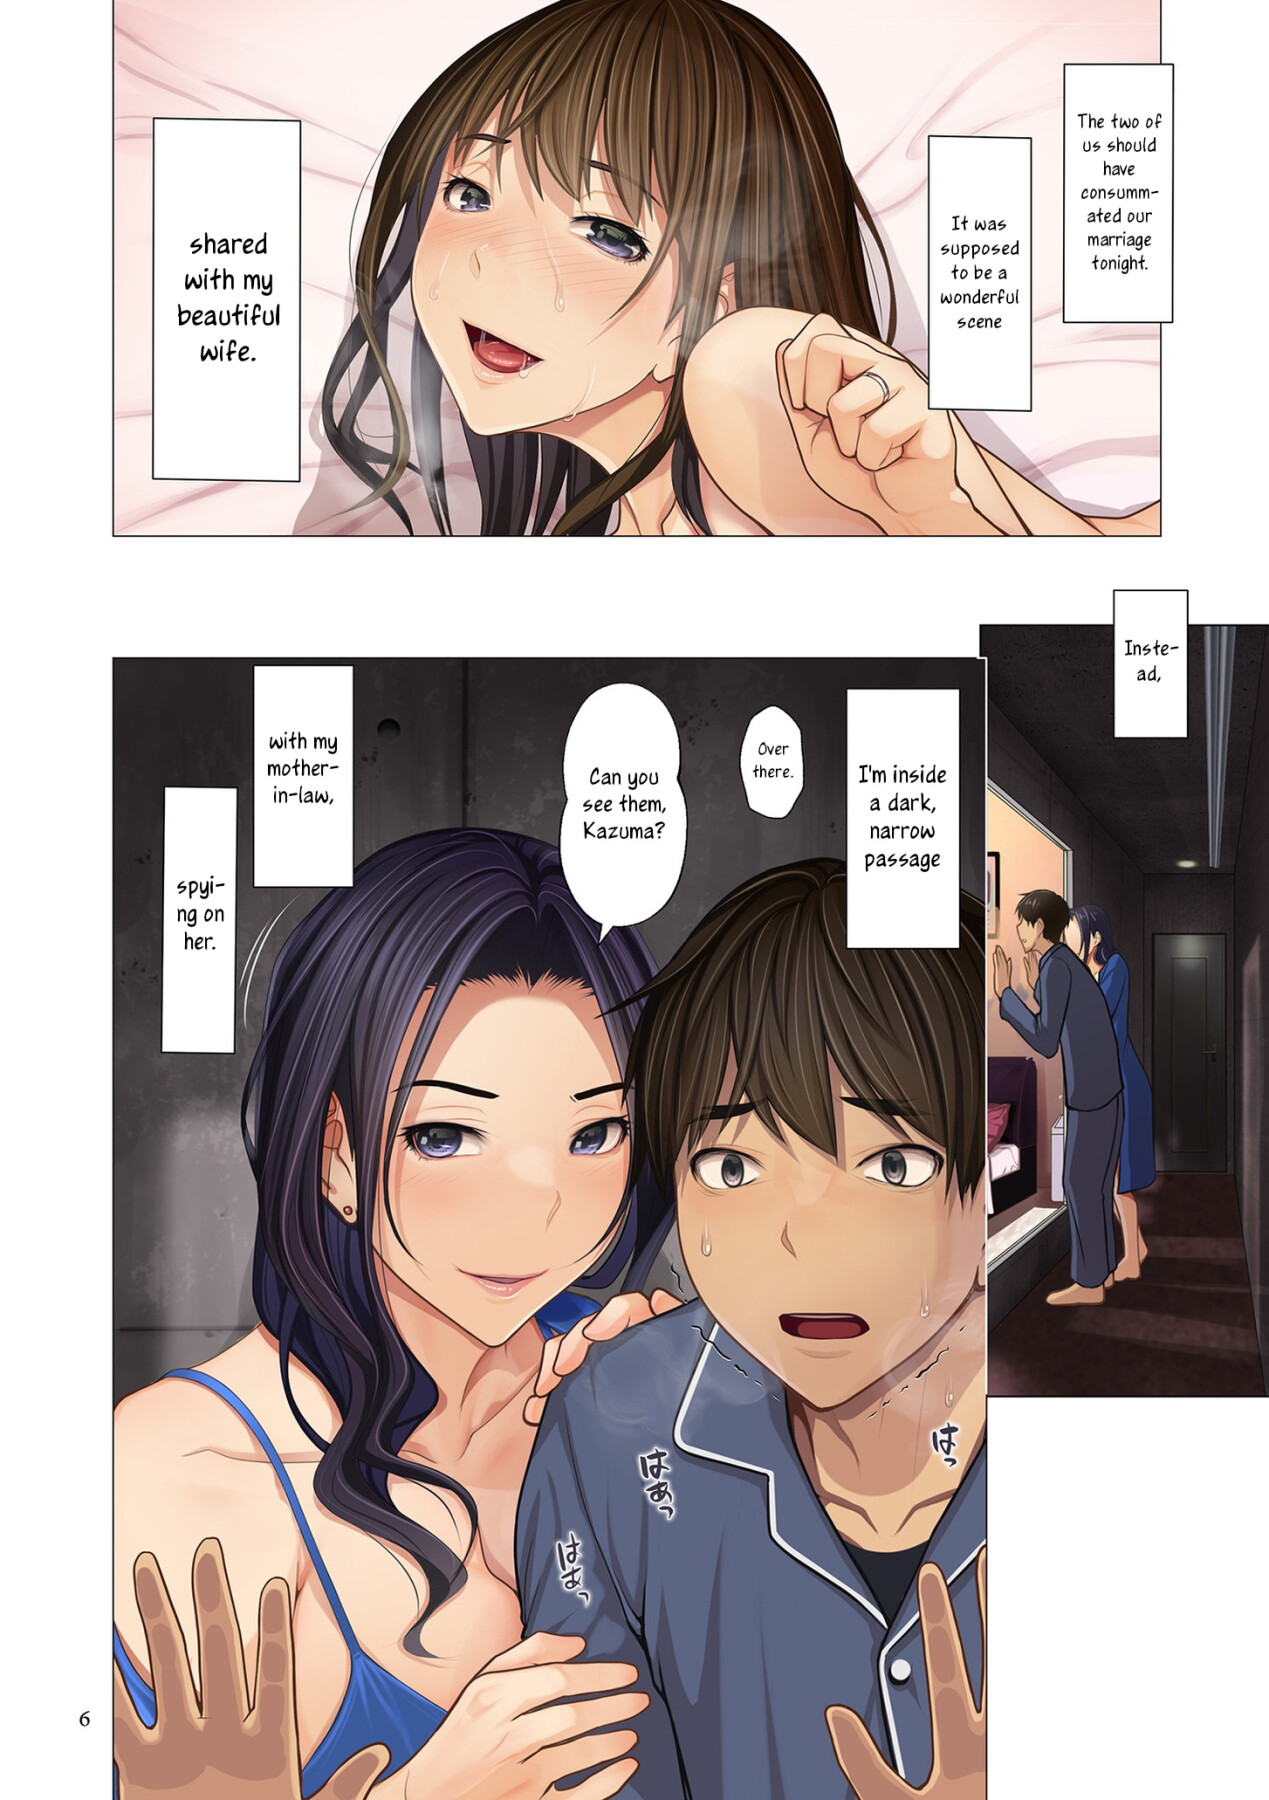 Hentai Manga Comic-I married into a wealthy family ~All the women in the family except my wife are mine~-Chapter 1-2